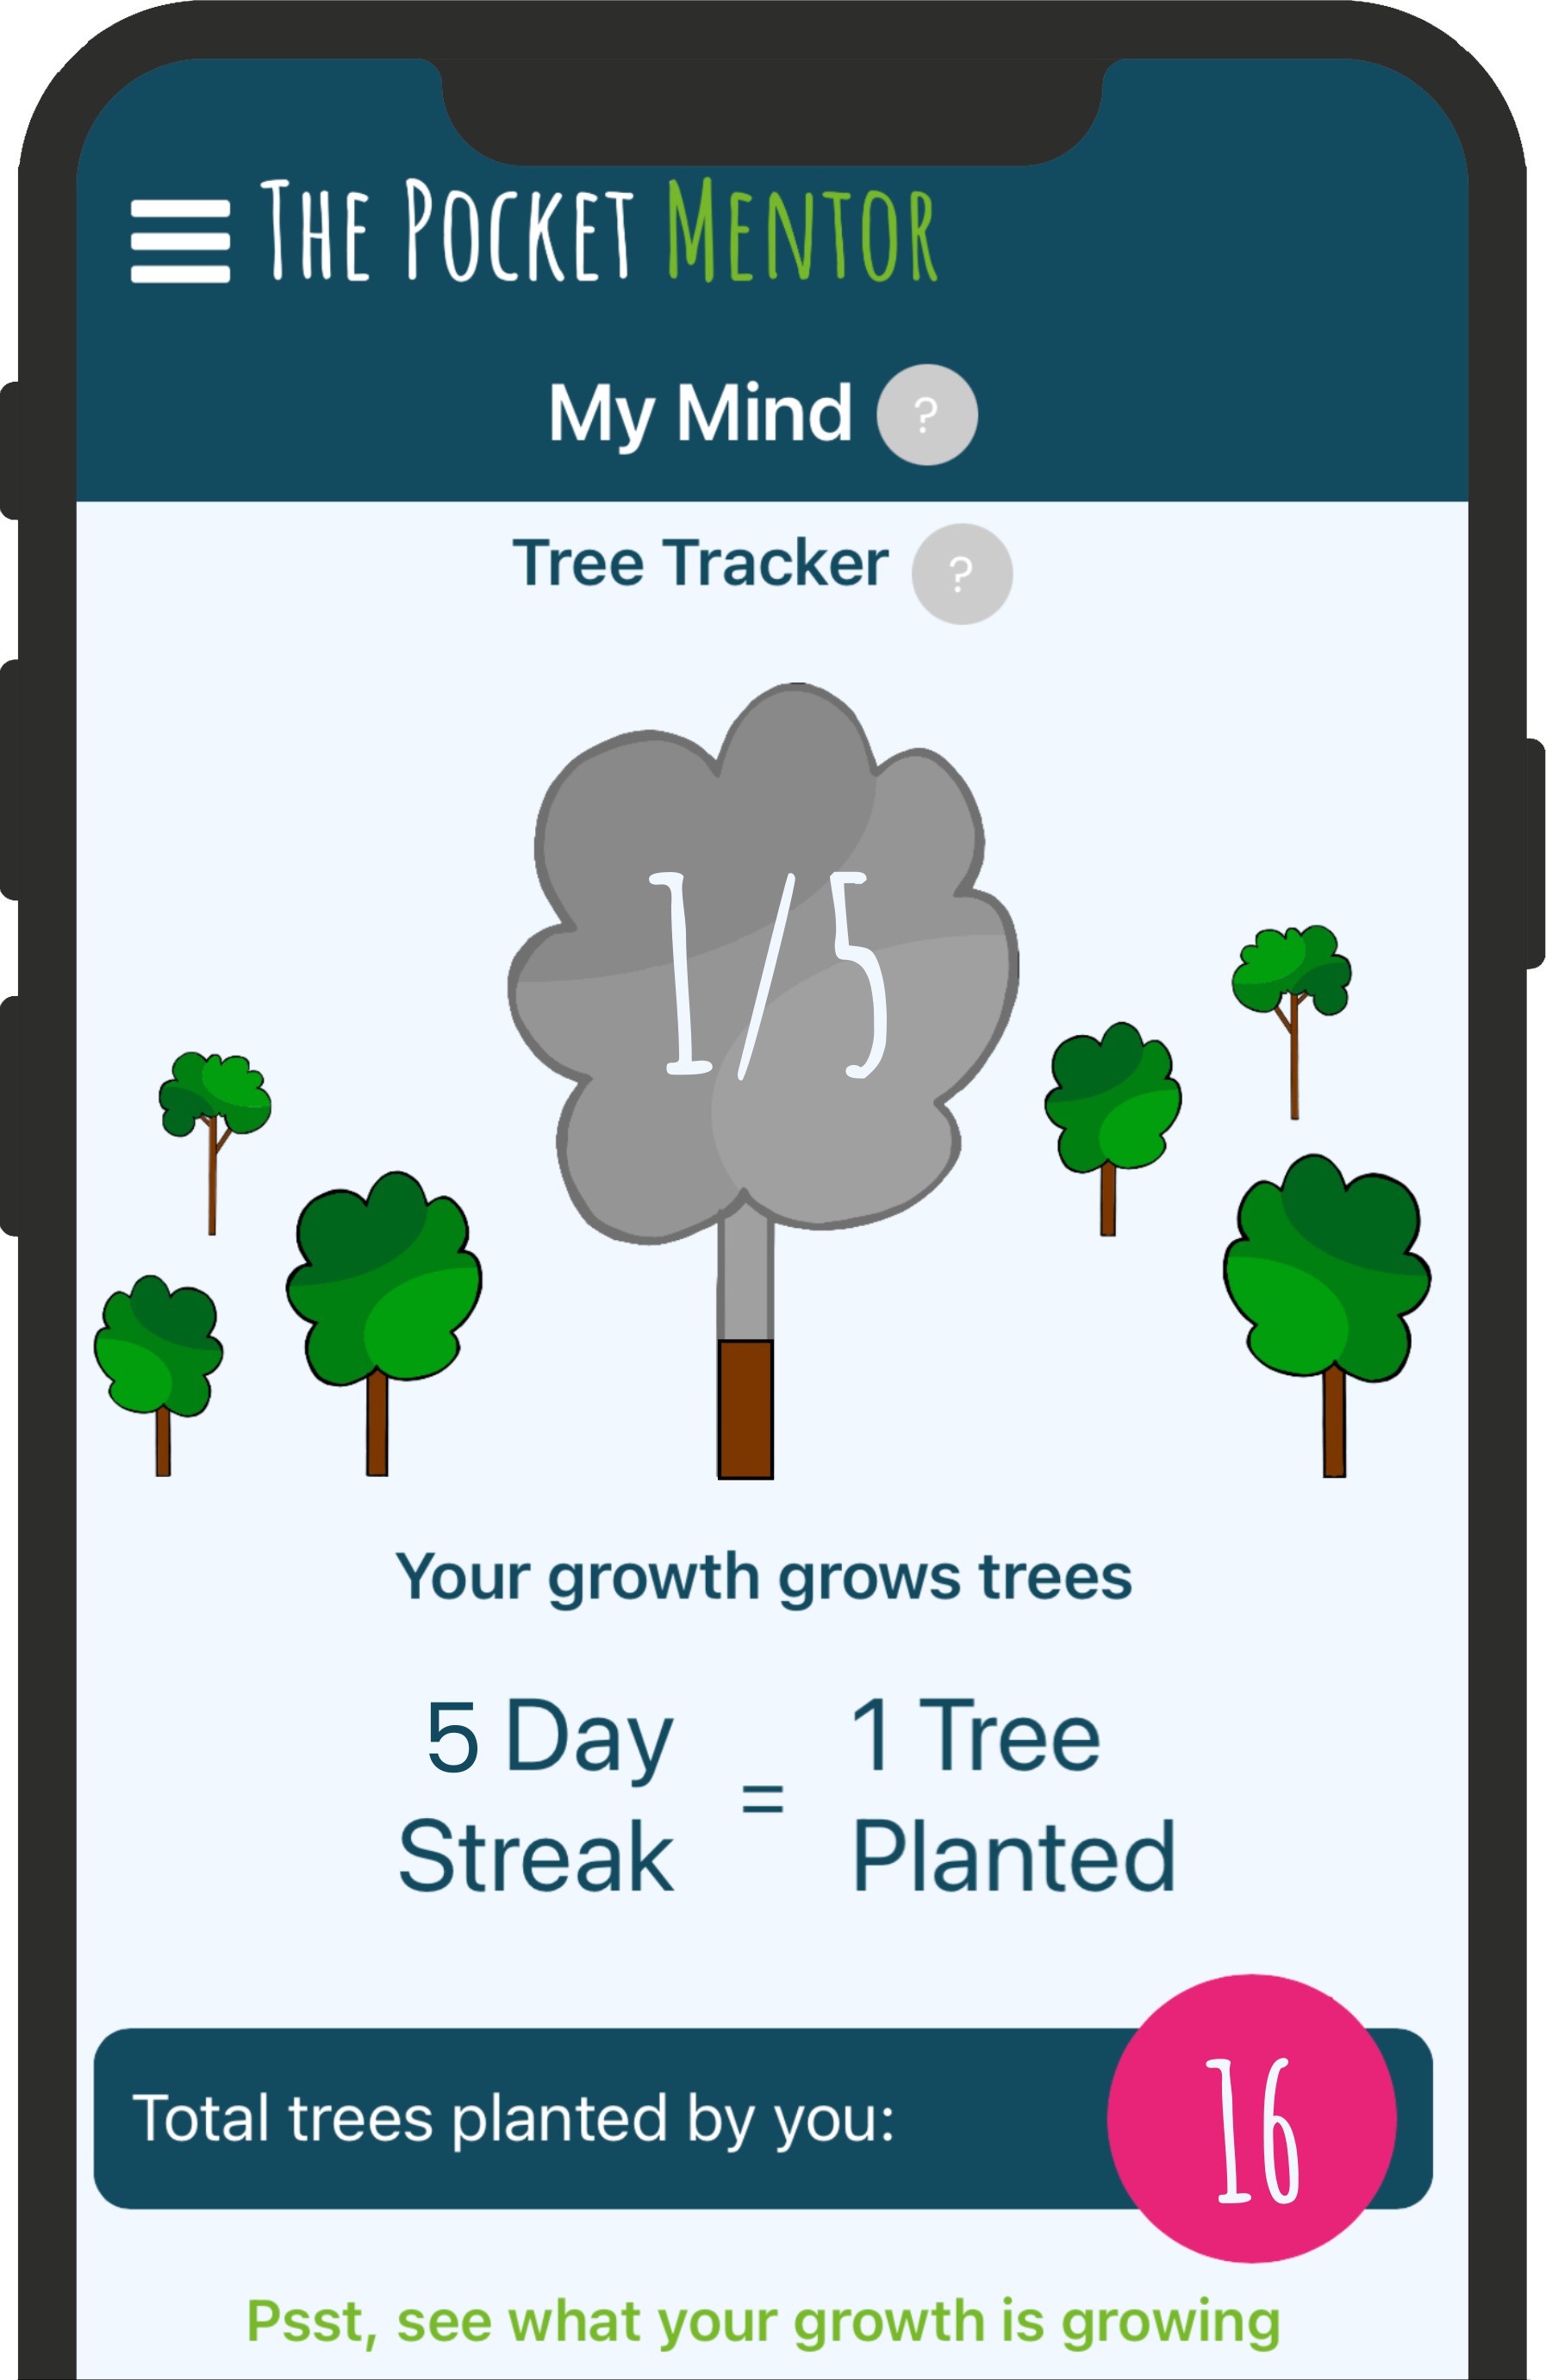 Your growth grows trees!